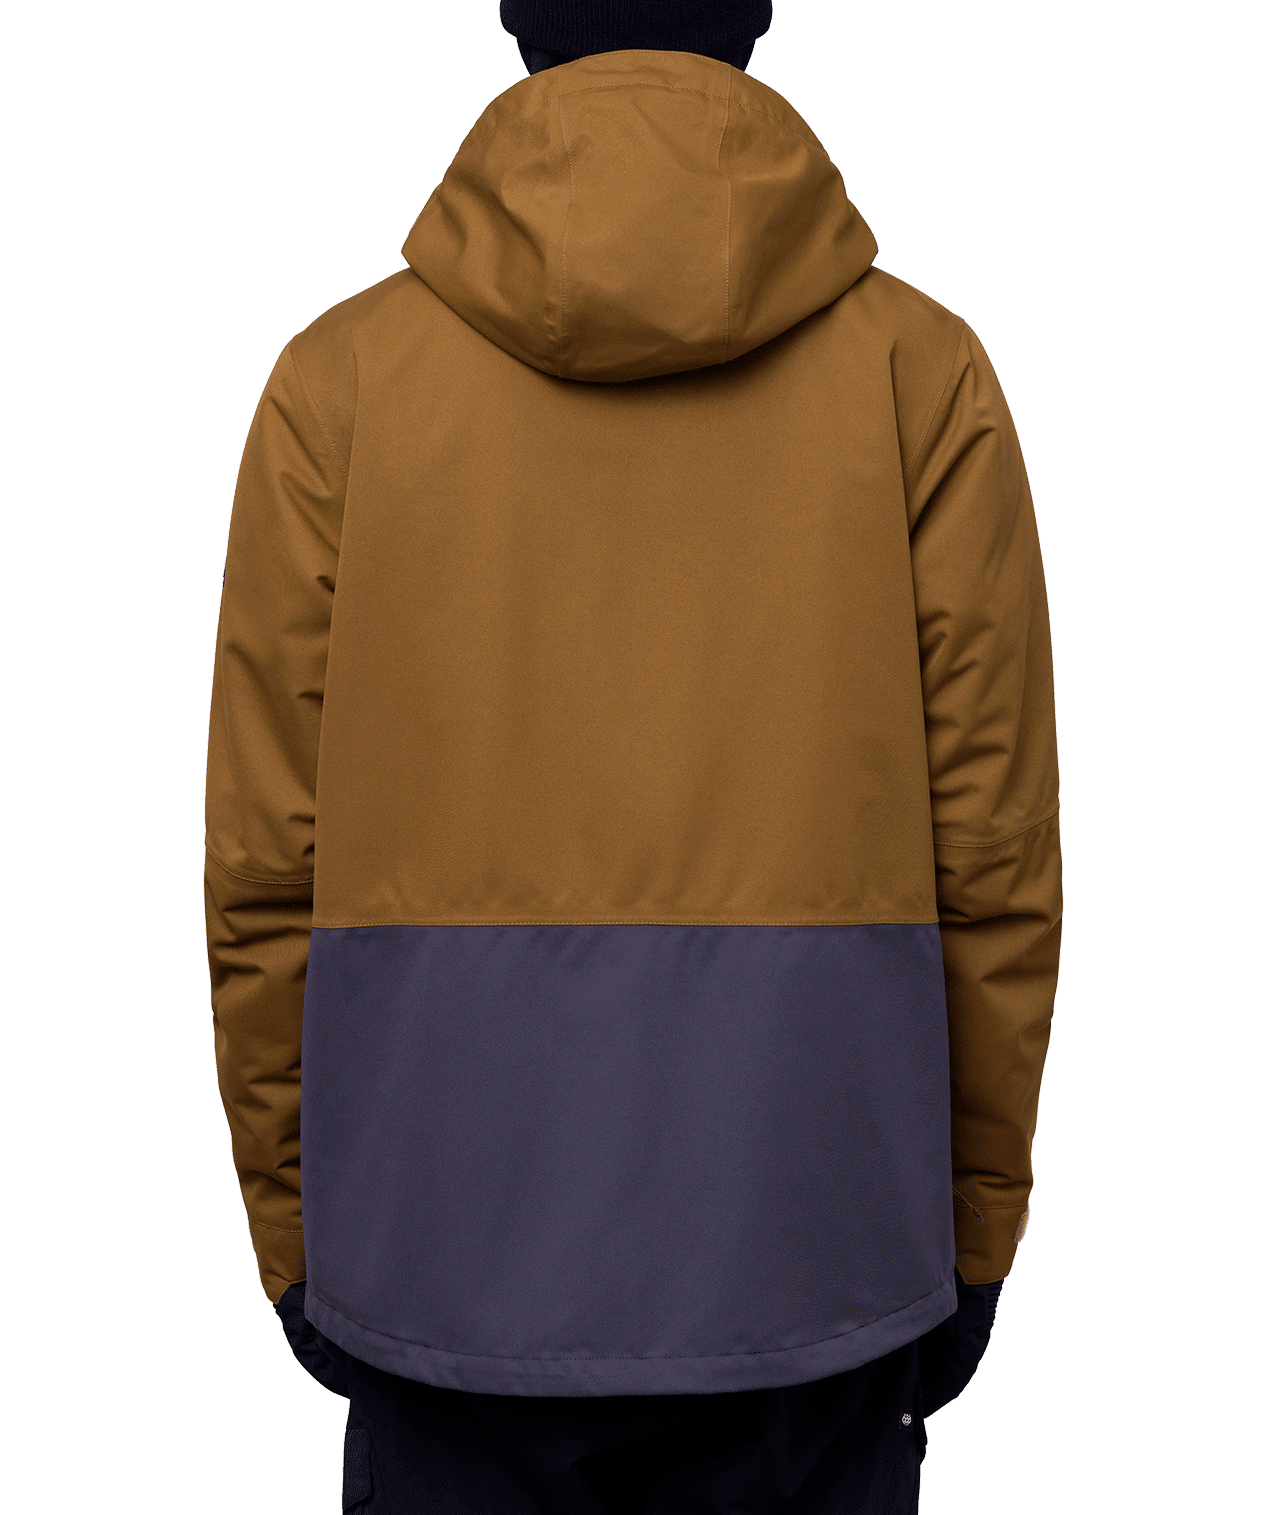 Buy 686 outerwear online in Canada at Freeride Boardshop Tagged cf-size-xl